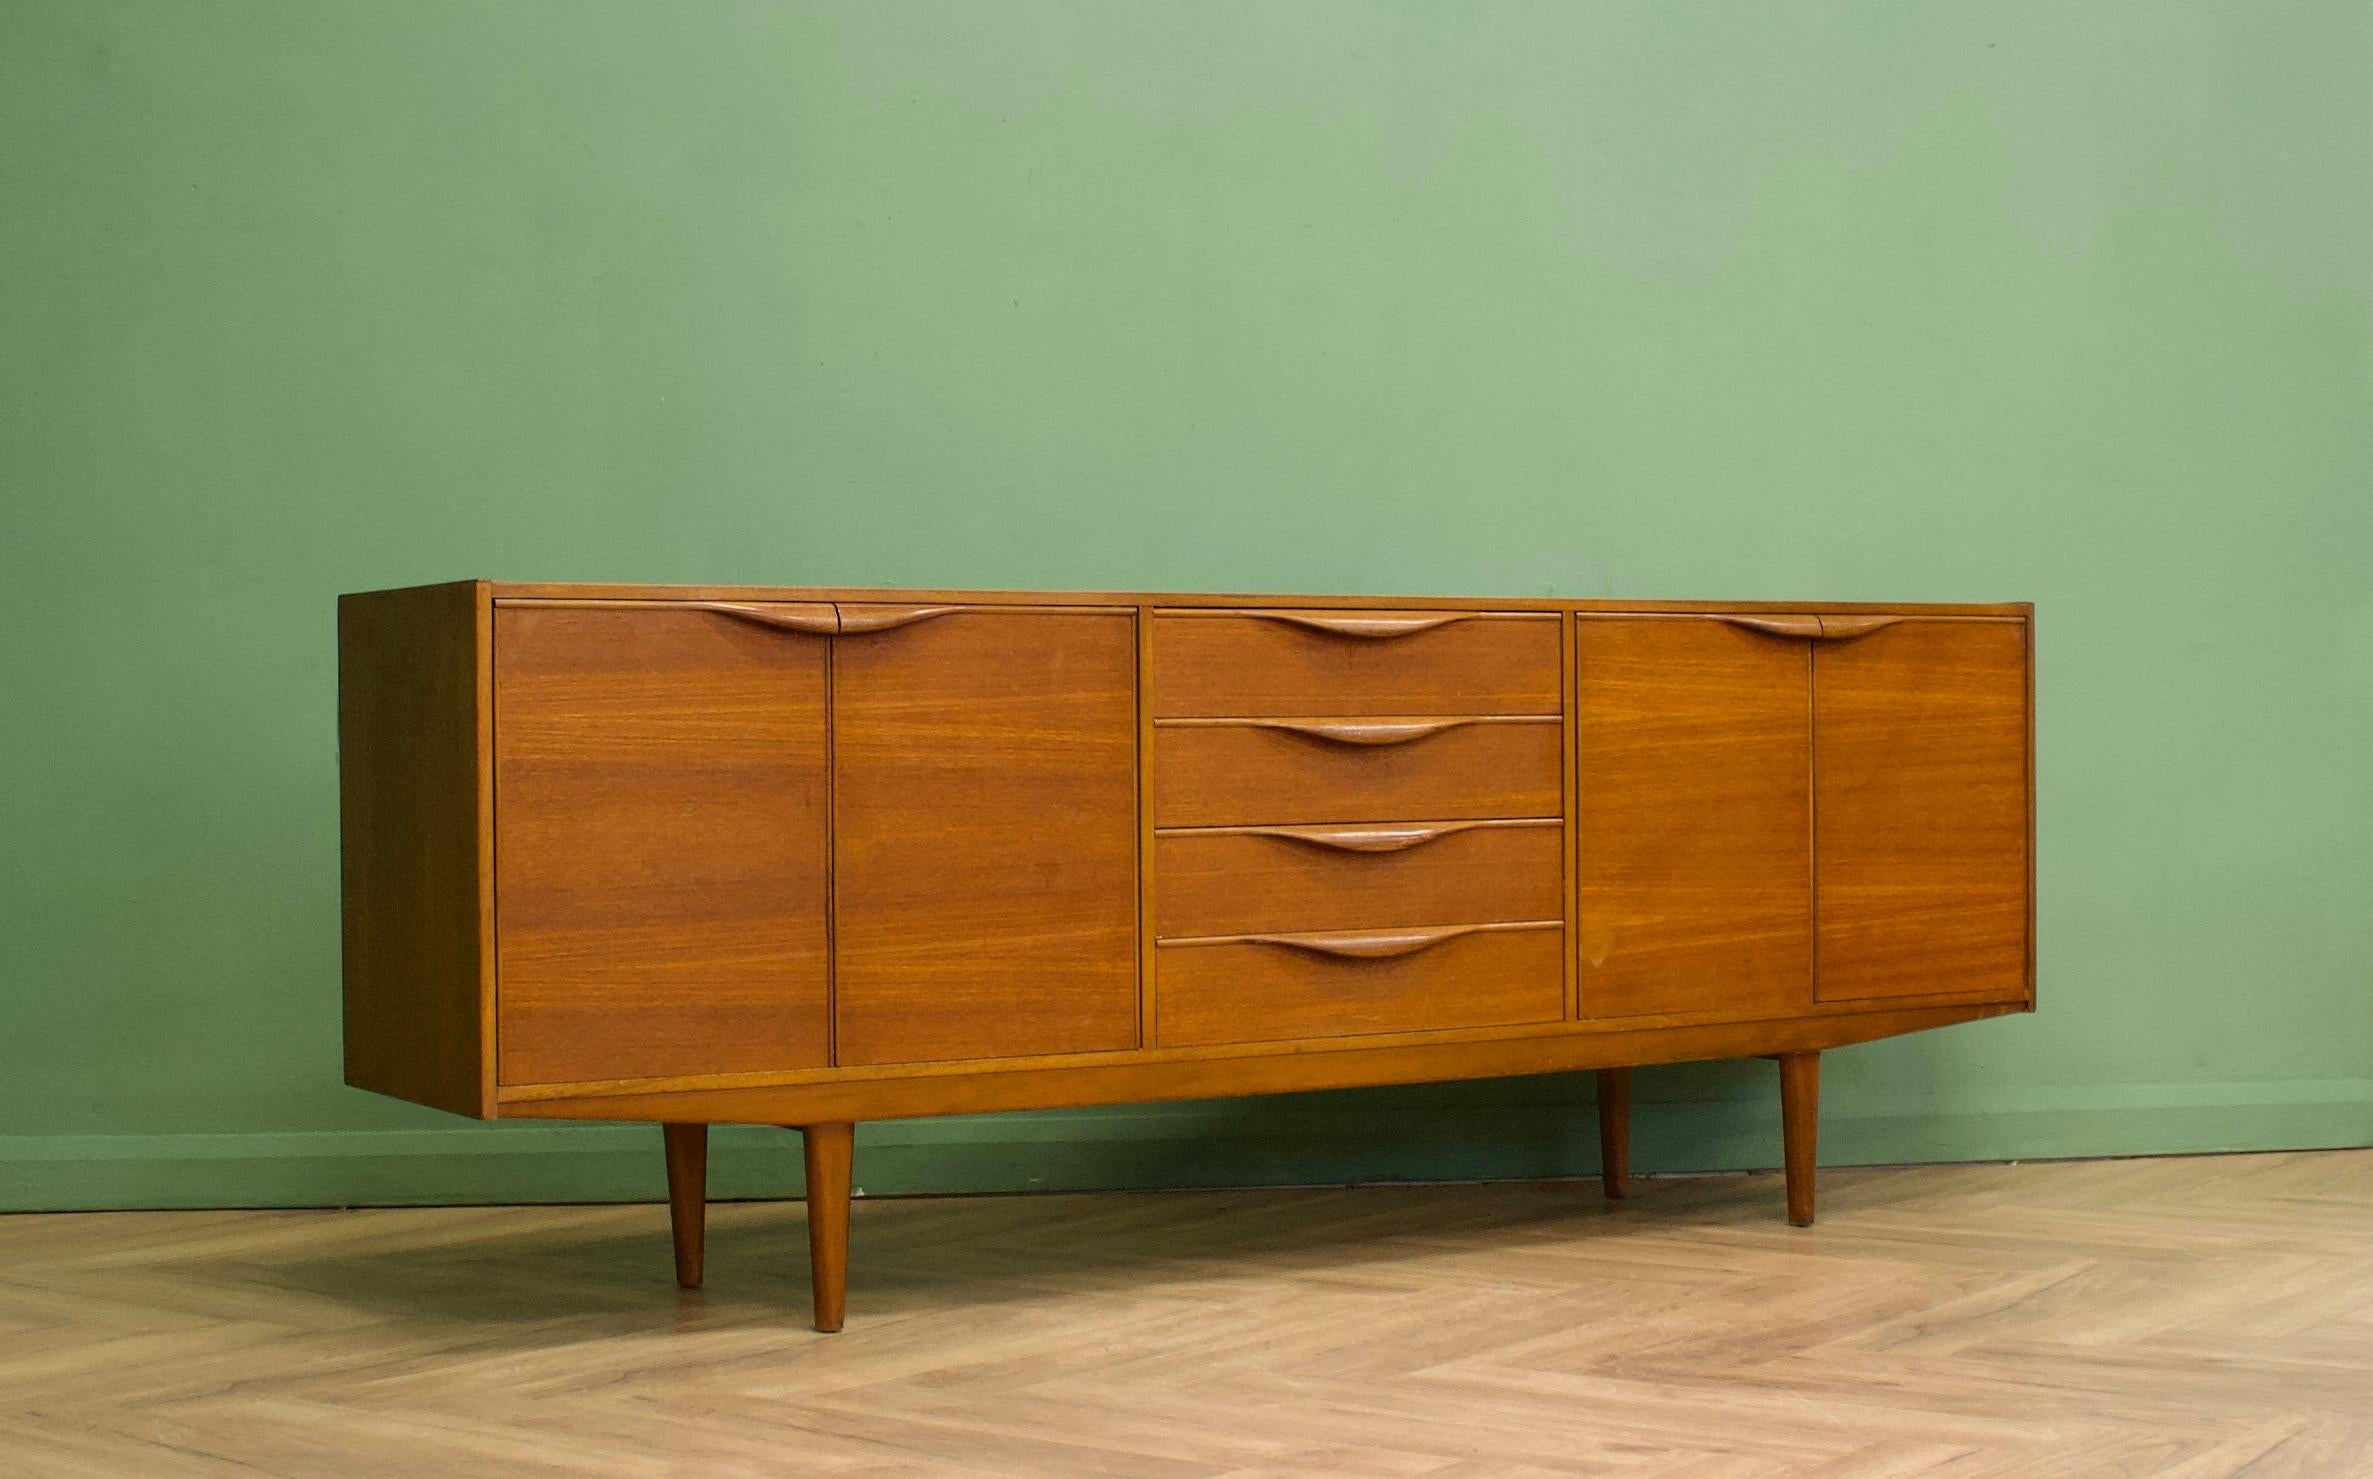 A mid century Swedish teak sideboard from AB Seffle Mobelfabrik, circa 1960s

Featuring 4 drawers, 2 cupboards and solid teak handles and legs